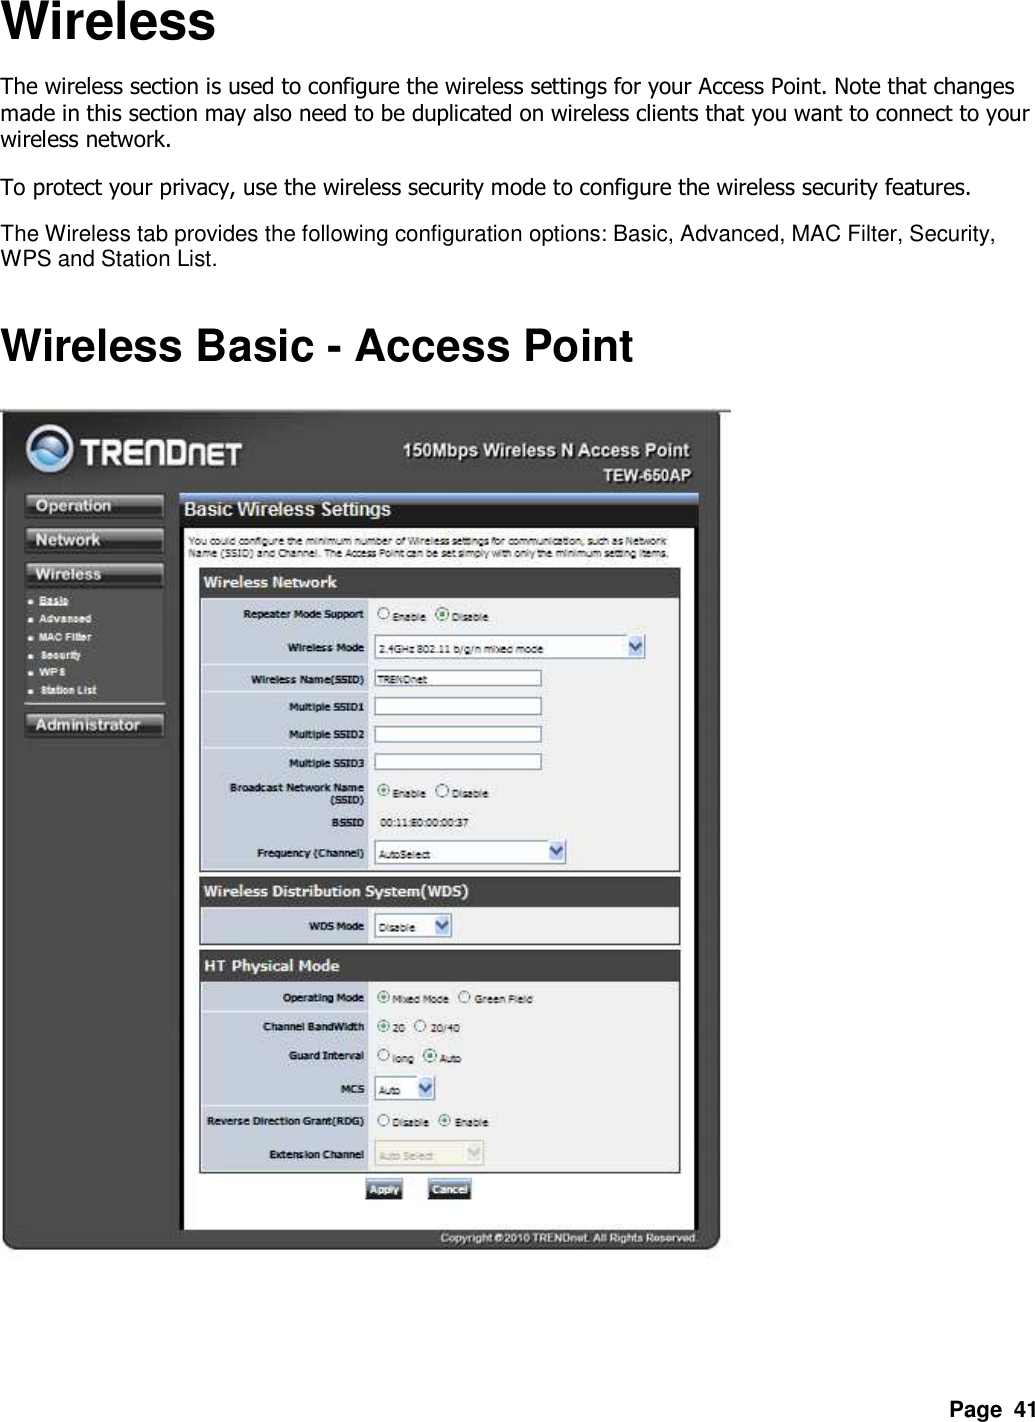 Page  41 Wireless The wireless section is used to configure the wireless settings for your Access Point. Note that changes made in this section may also need to be duplicated on wireless clients that you want to connect to your wireless network.   To protect your privacy, use the wireless security mode to configure the wireless security features.   The Wireless tab provides the following configuration options: Basic, Advanced, MAC Filter, Security, WPS and Station List.    Wireless Basic - Access Point      